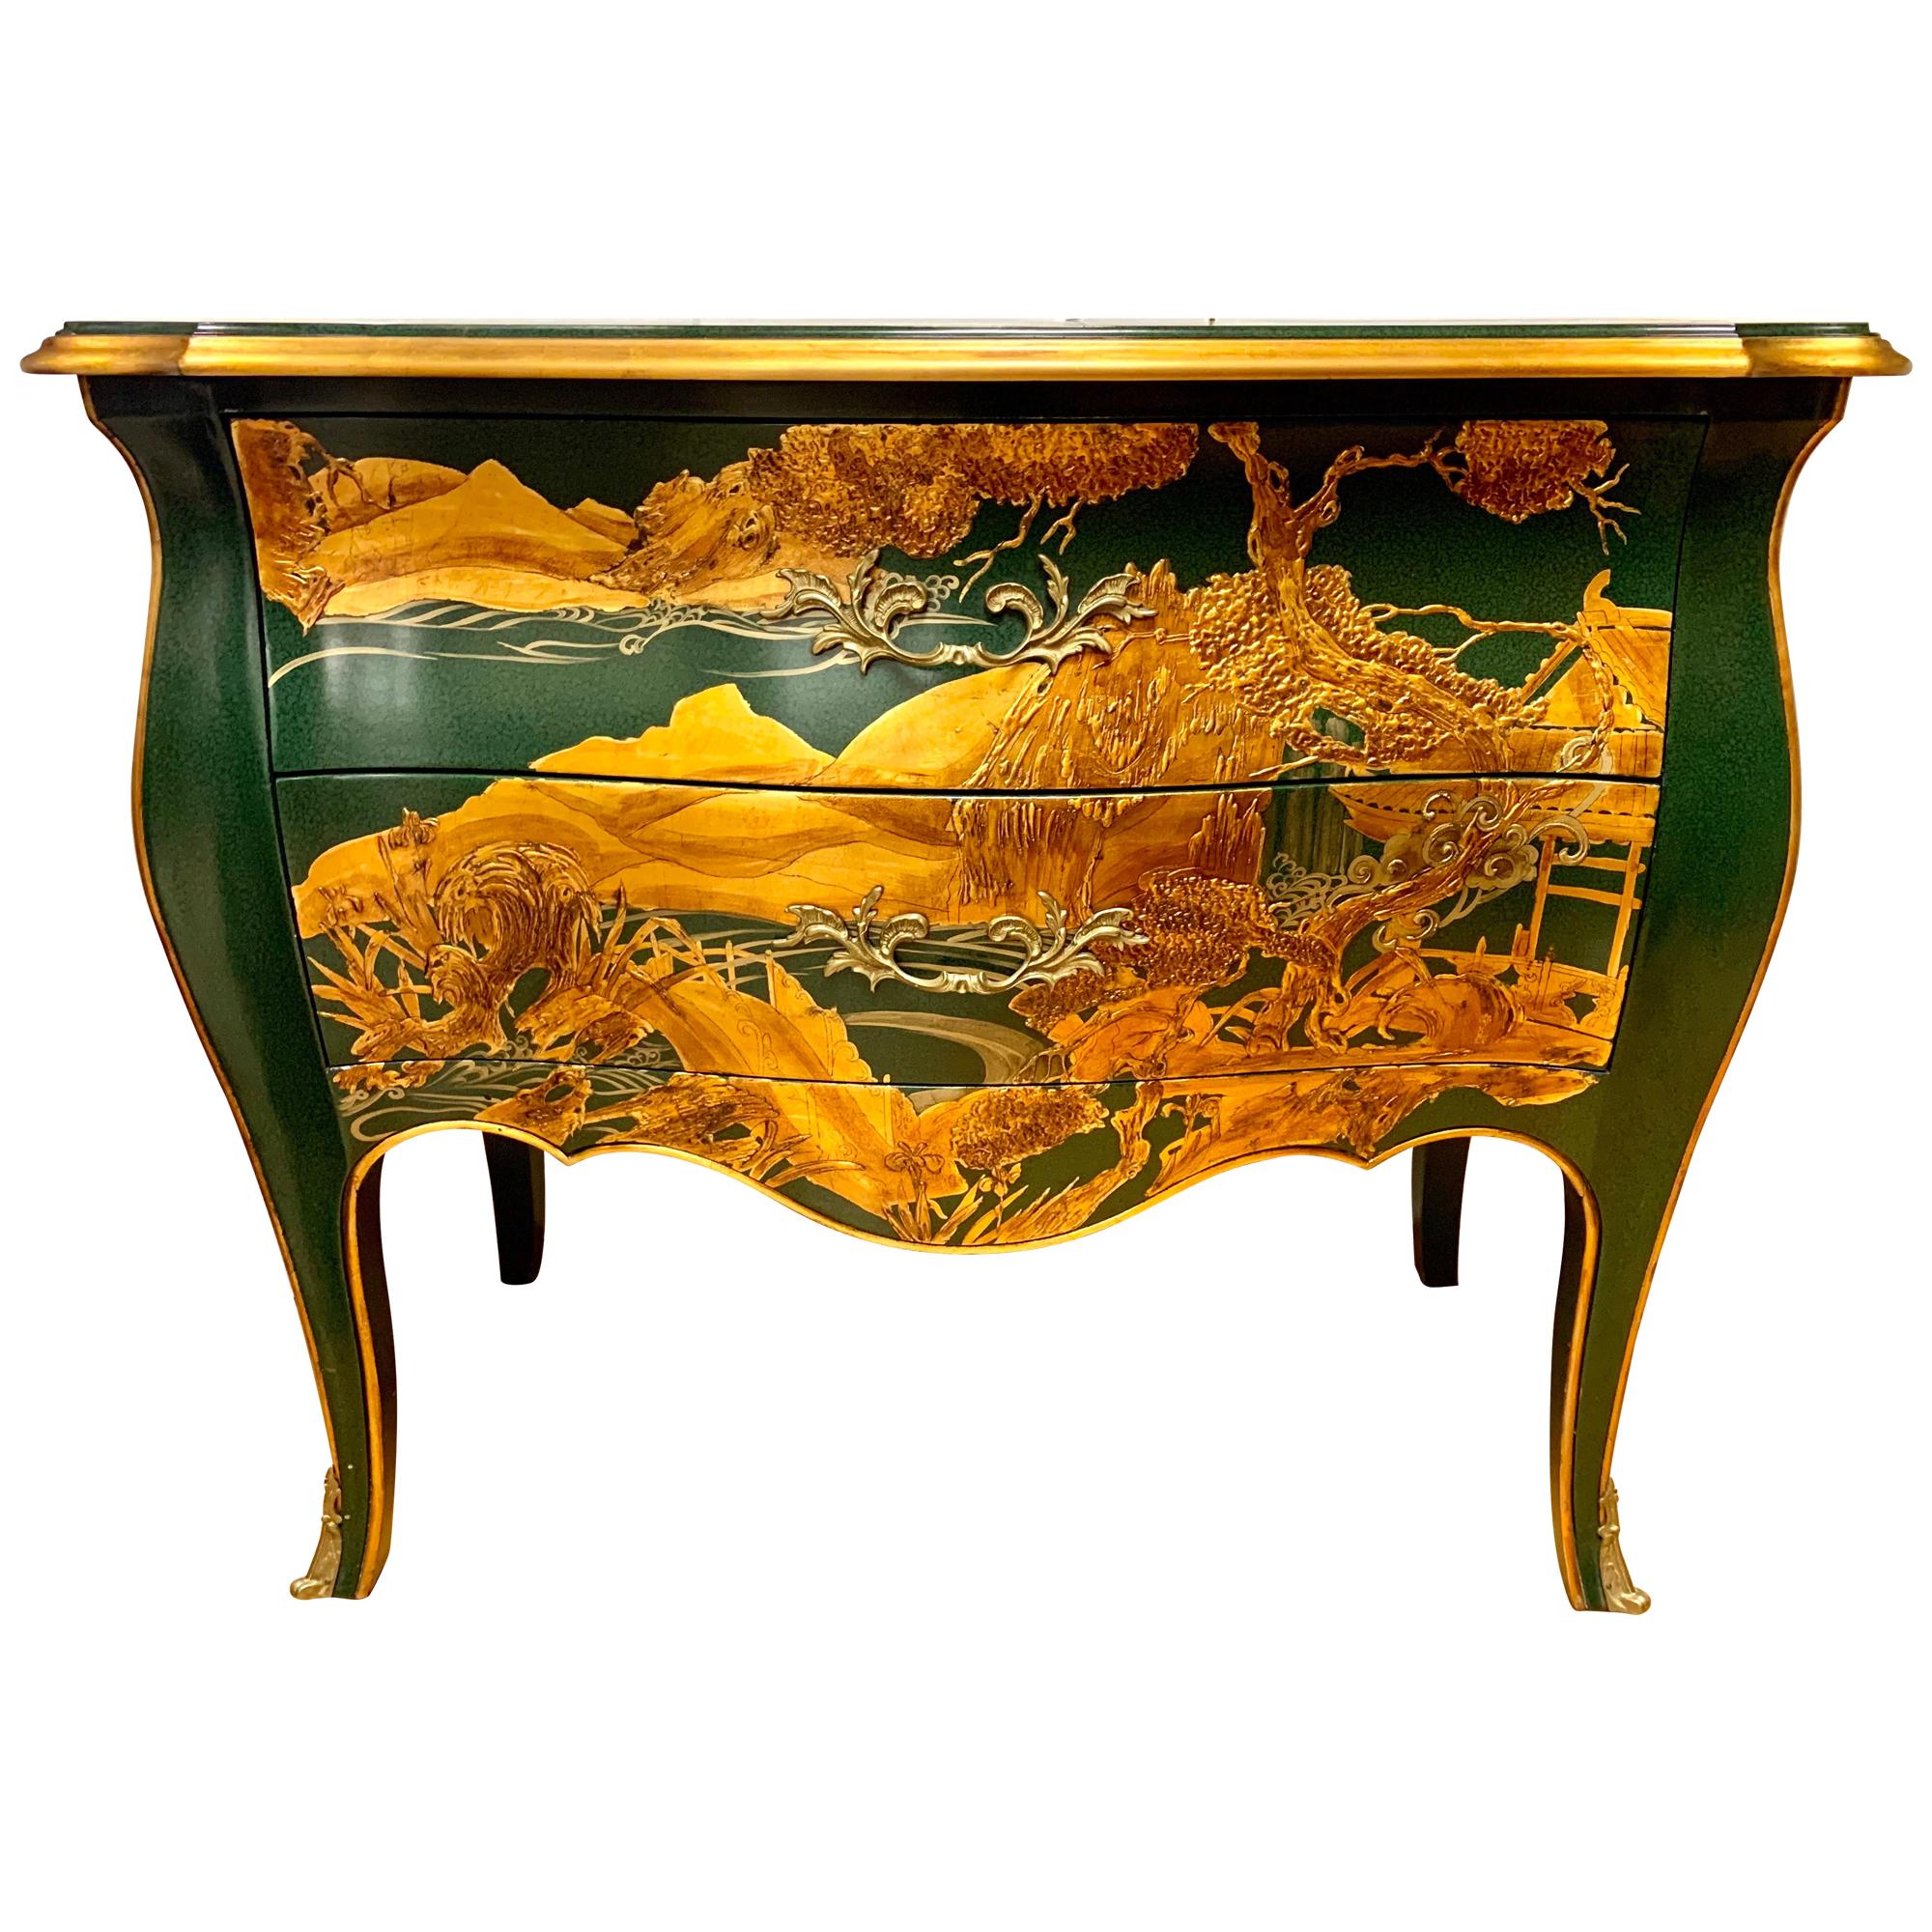 Signed Chinoiserie Green Lacquer and Gold Bombe Chest by John Widdicomb Dresser